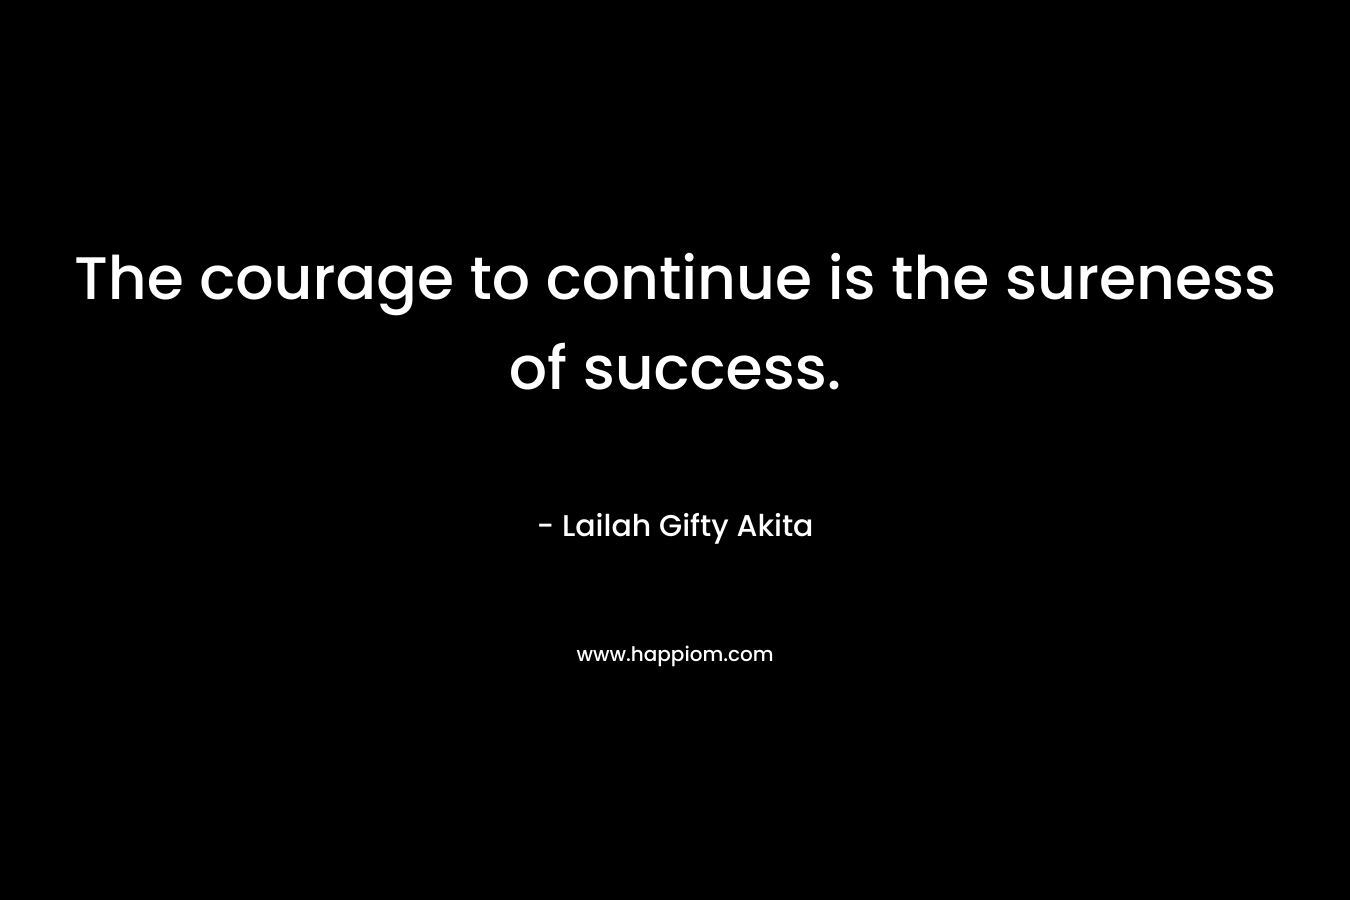 The courage to continue is the sureness of success. – Lailah Gifty Akita